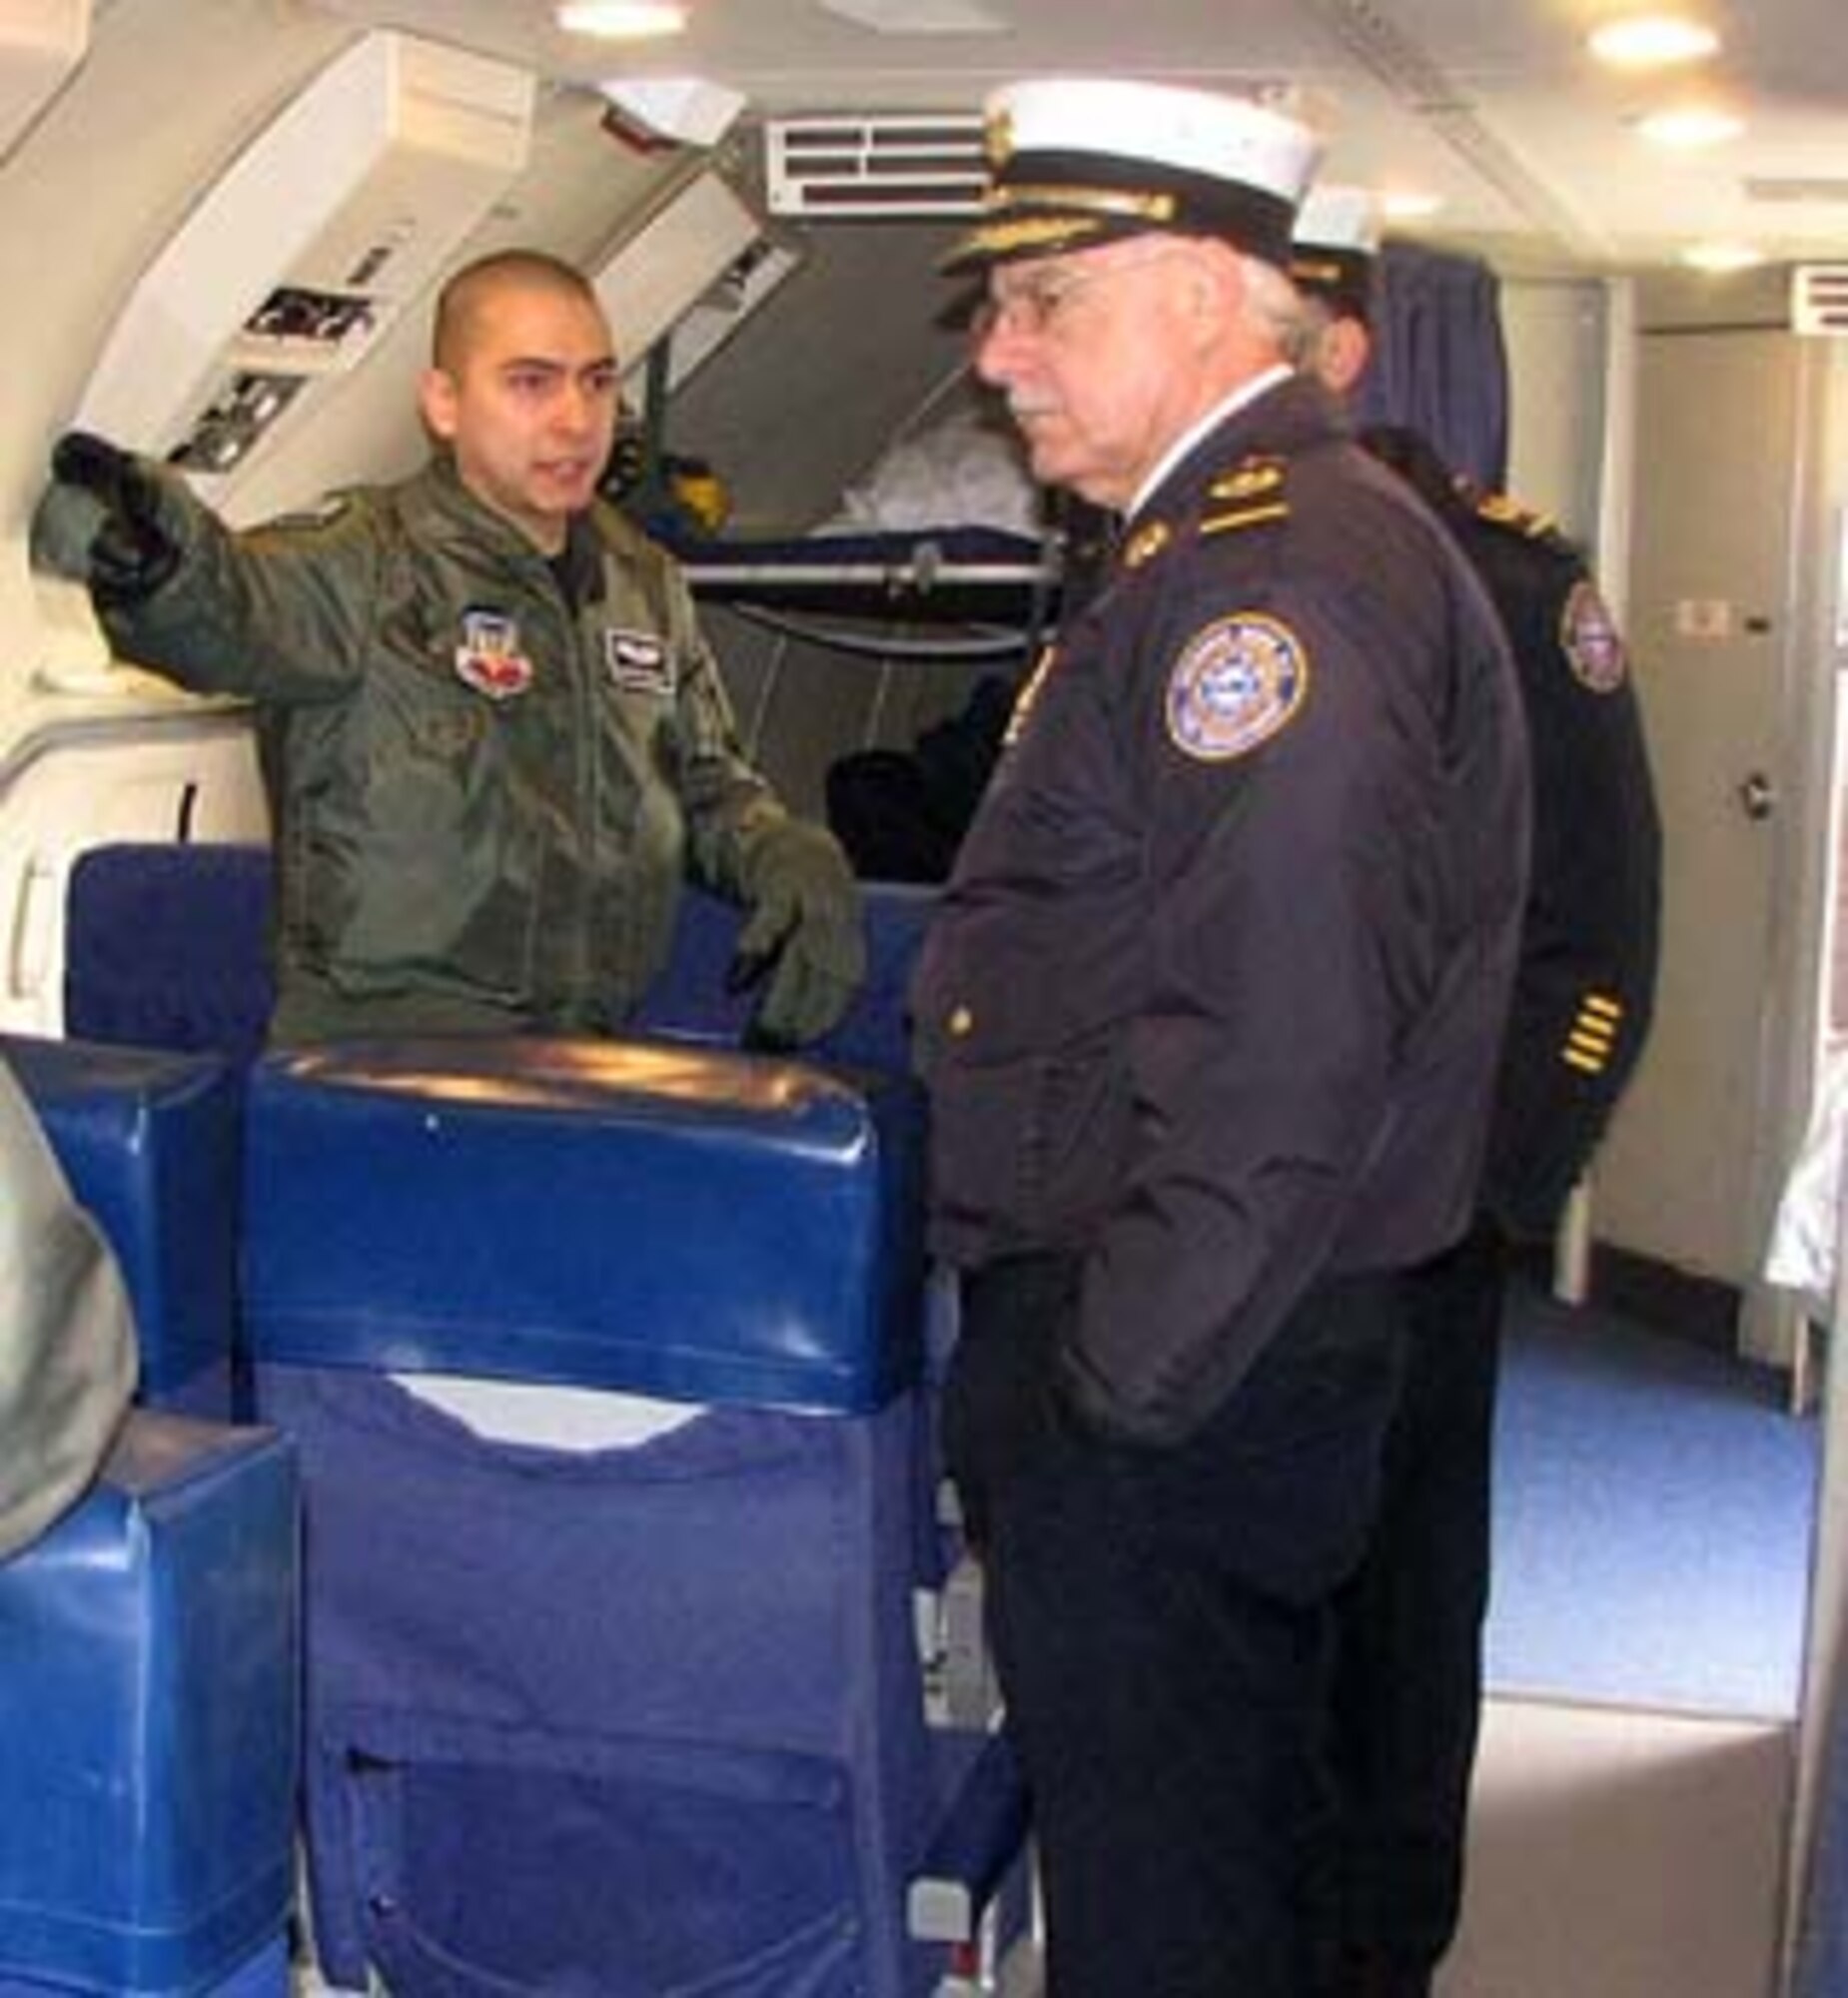 An aircrew member on the E-3 Sentry Airborne Warning and Control System, or AWACS, aircraft from the 552nd Air Control Wing based at Tinker Air Force Base, Okla., briefs Rome Fire Department Chief Roger Sabia about the AWACS mission Tuesday, March 11, 2008. Photo by Brooke Davis, NEADS Public Affairs
